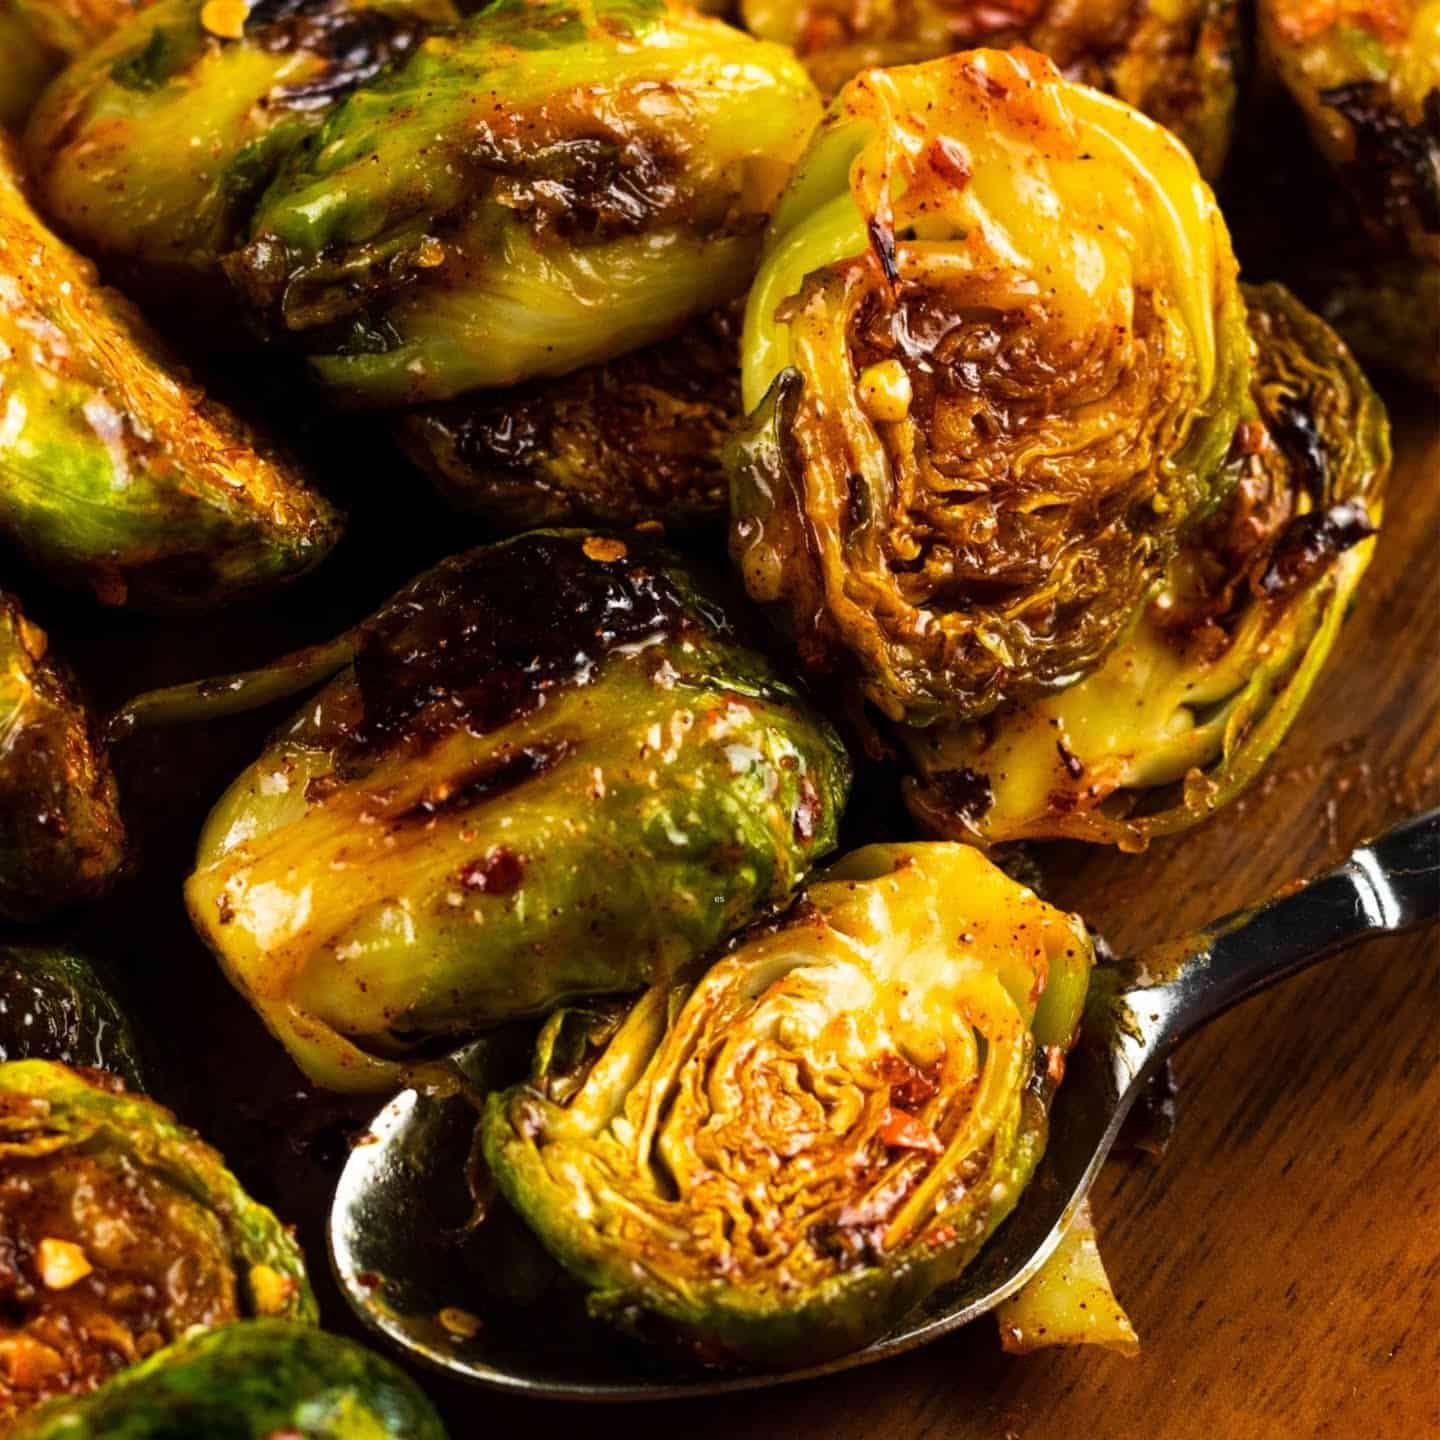  Brussel Sprouts